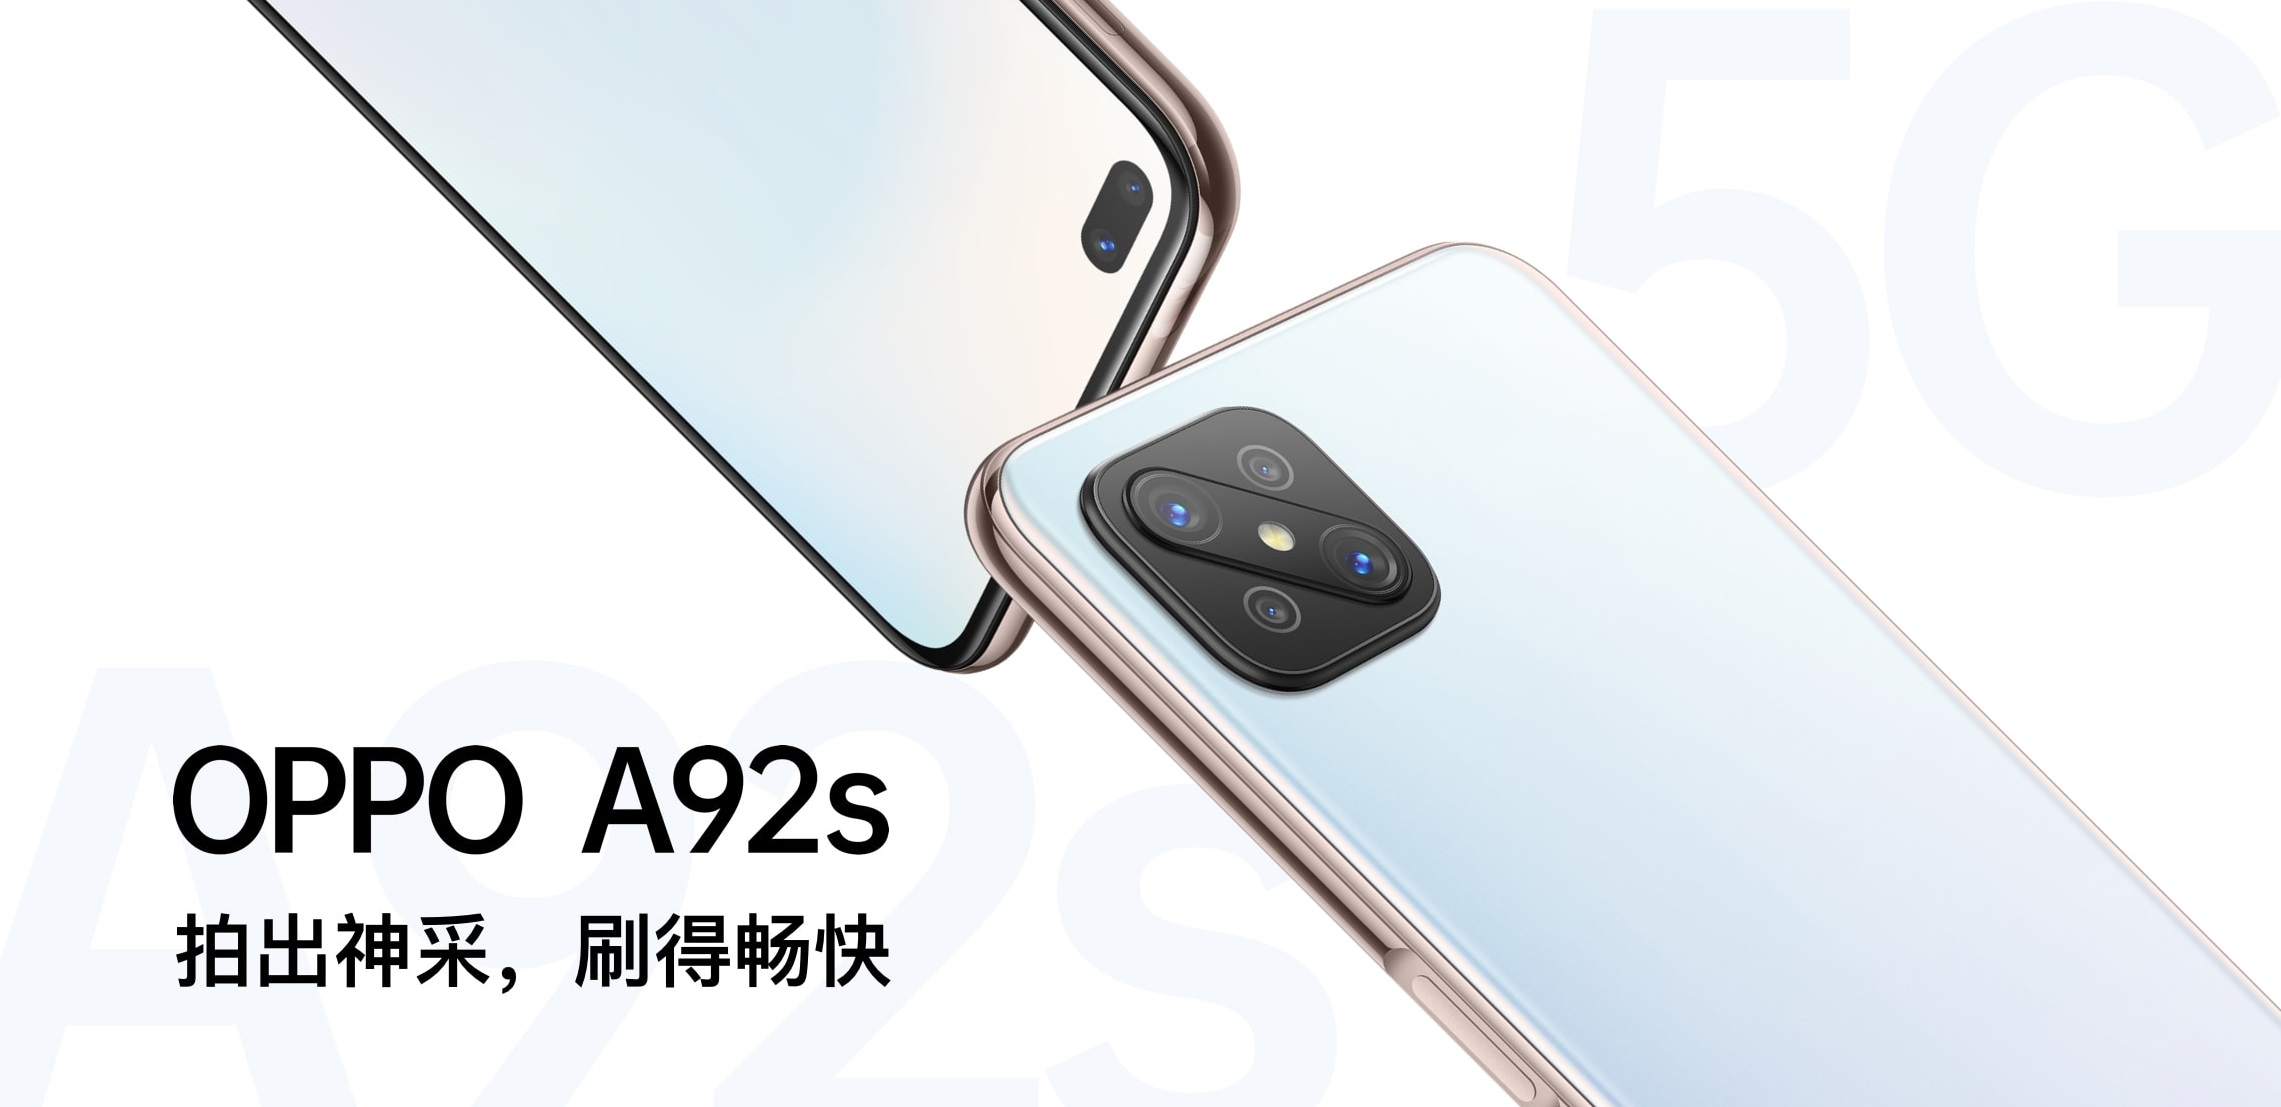 OPPO A92s featured